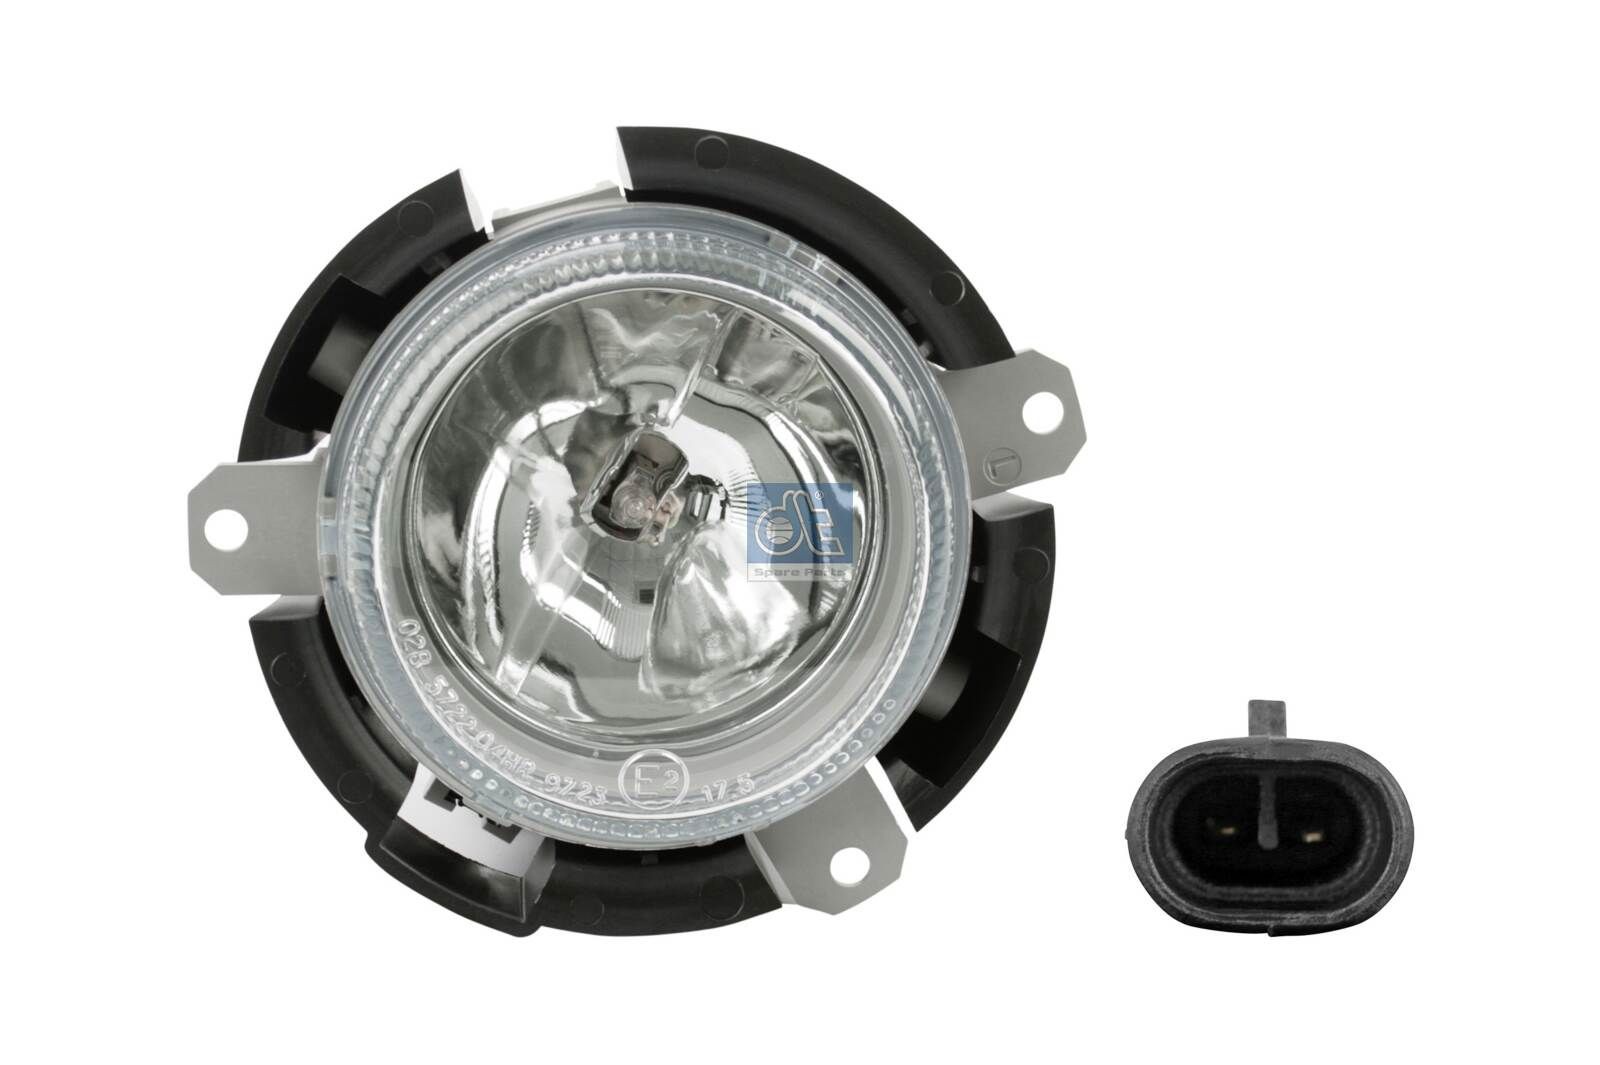 Iveco Spotlight DT Spare Parts 7.25060 at a good price